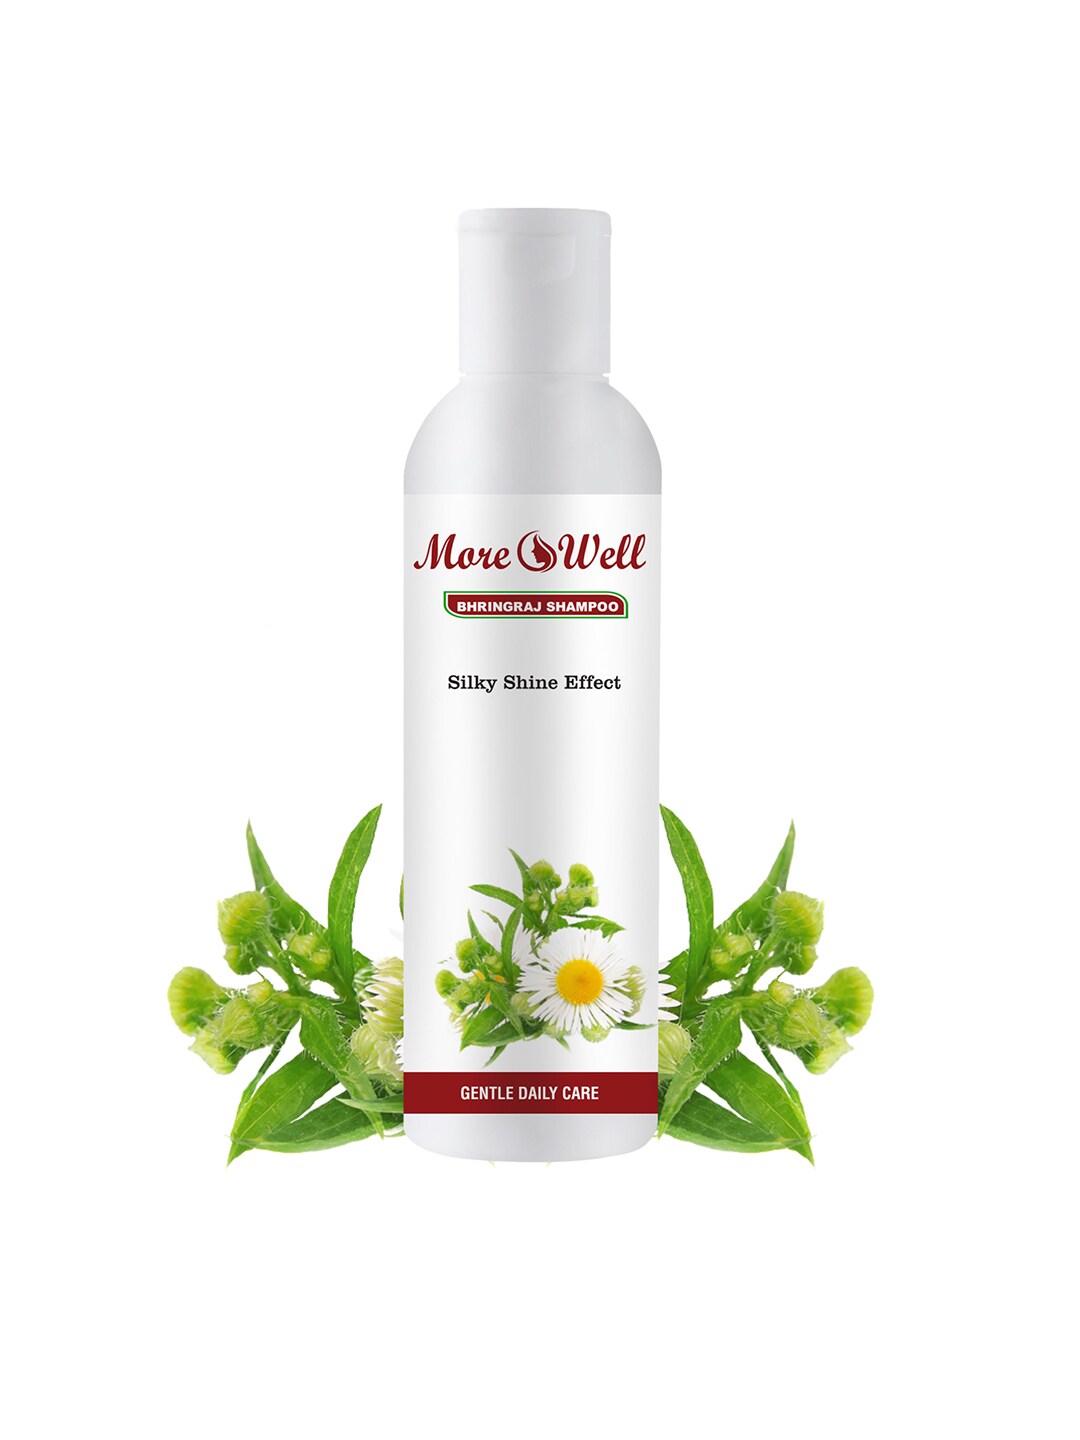 Morewell Bhringraj Shampoo for Silky Shiny Effect - 100 ml Price in India